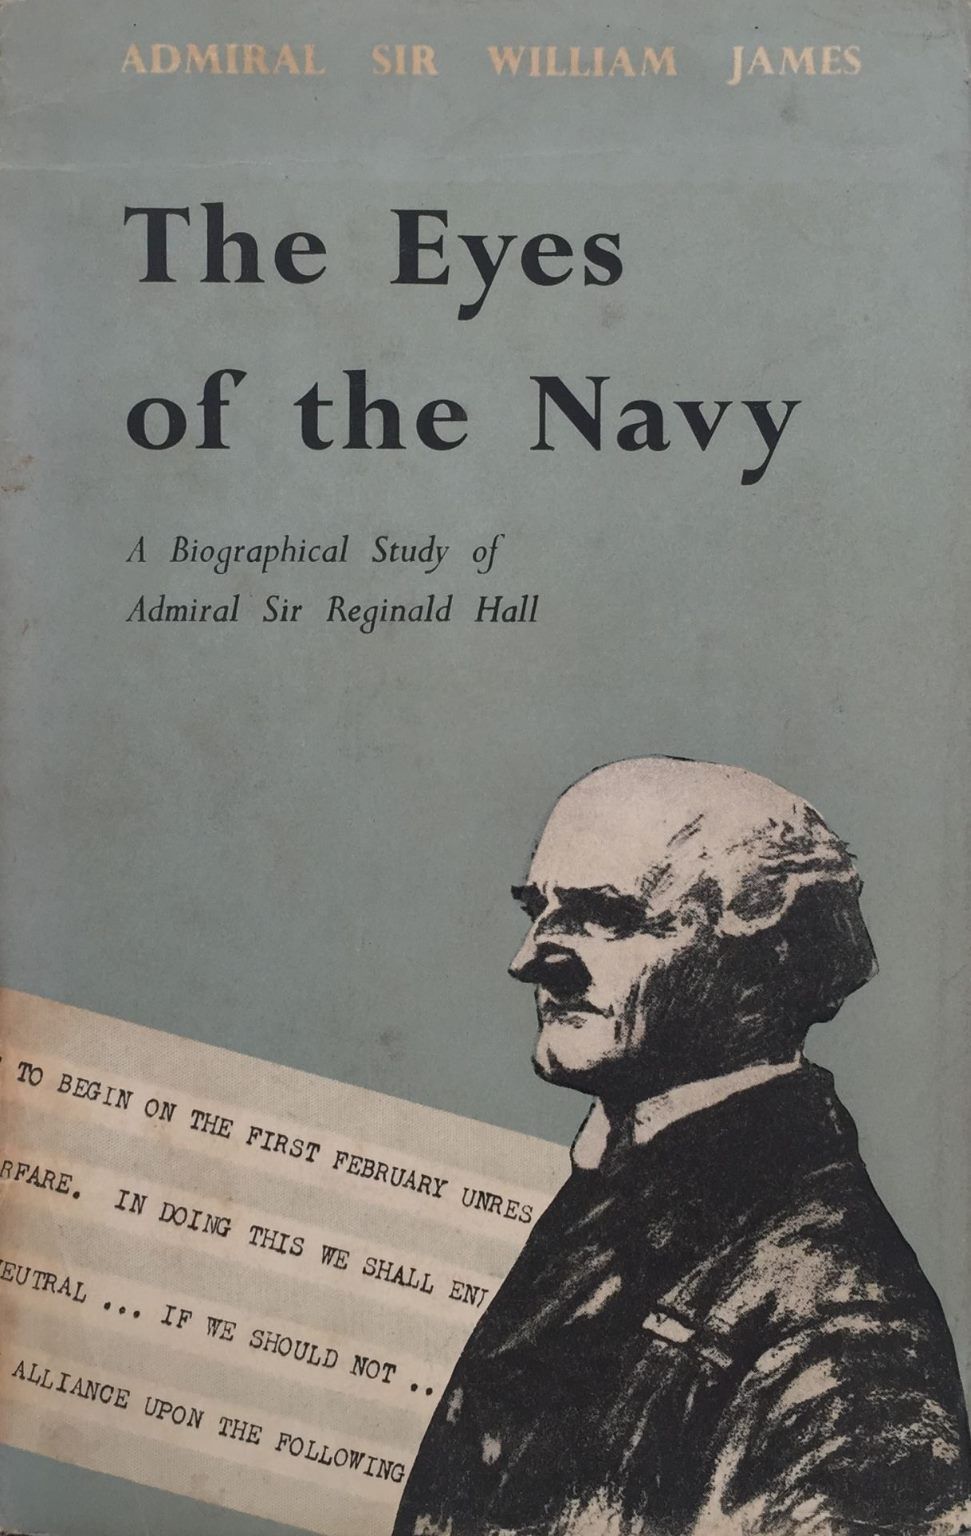 THE EYES OF THE NAVY: A Biographical Study of Admiral Sir Reginald Hall